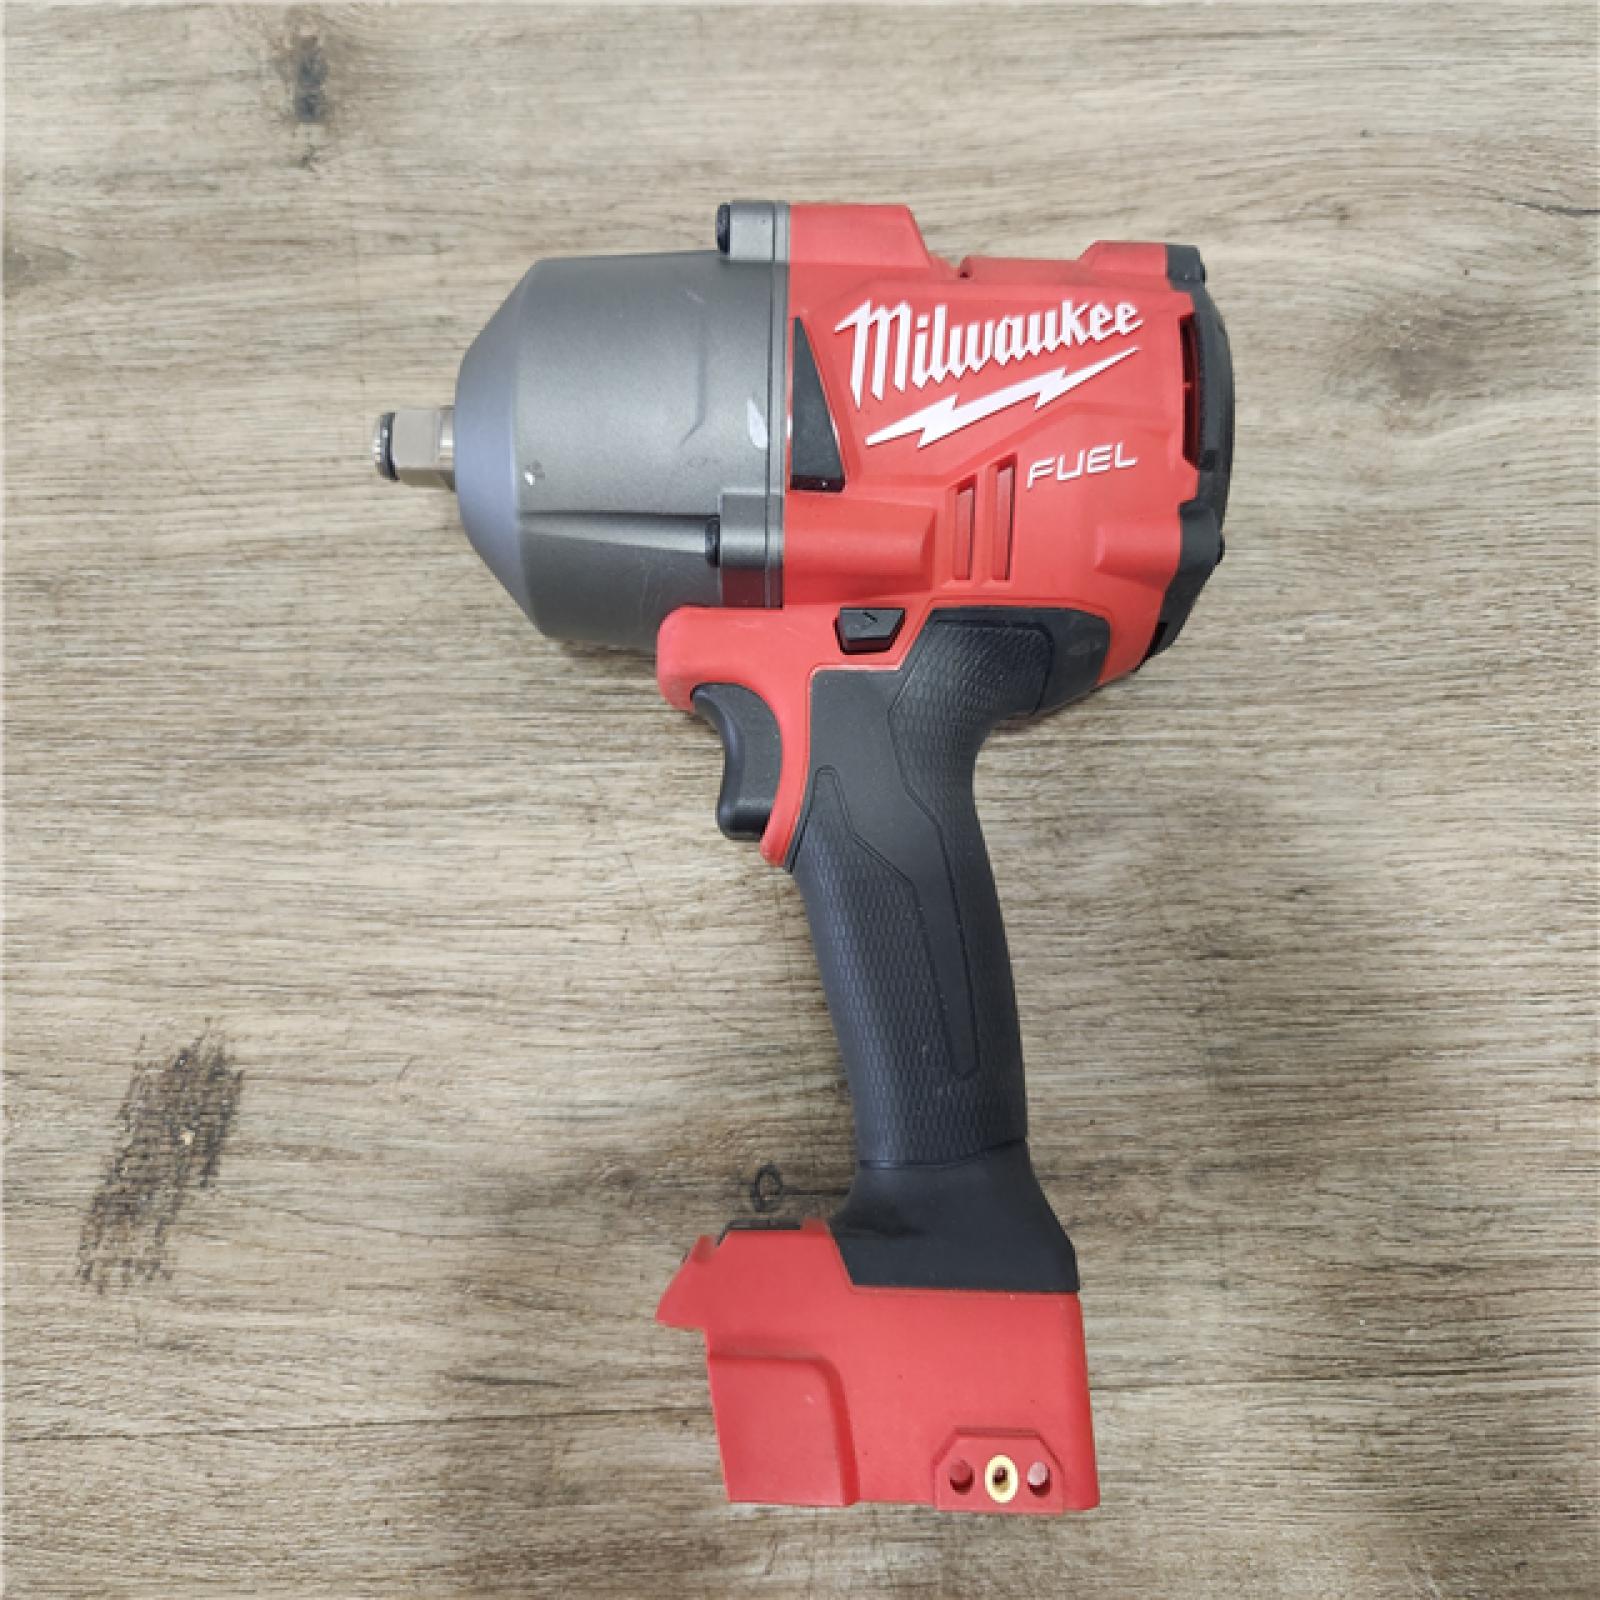 Phoenix Location Like NEW Milwaukee  M18 FUEL™ 1/2 High Torque Impact Wrench with Friction Ring (Tool Only)